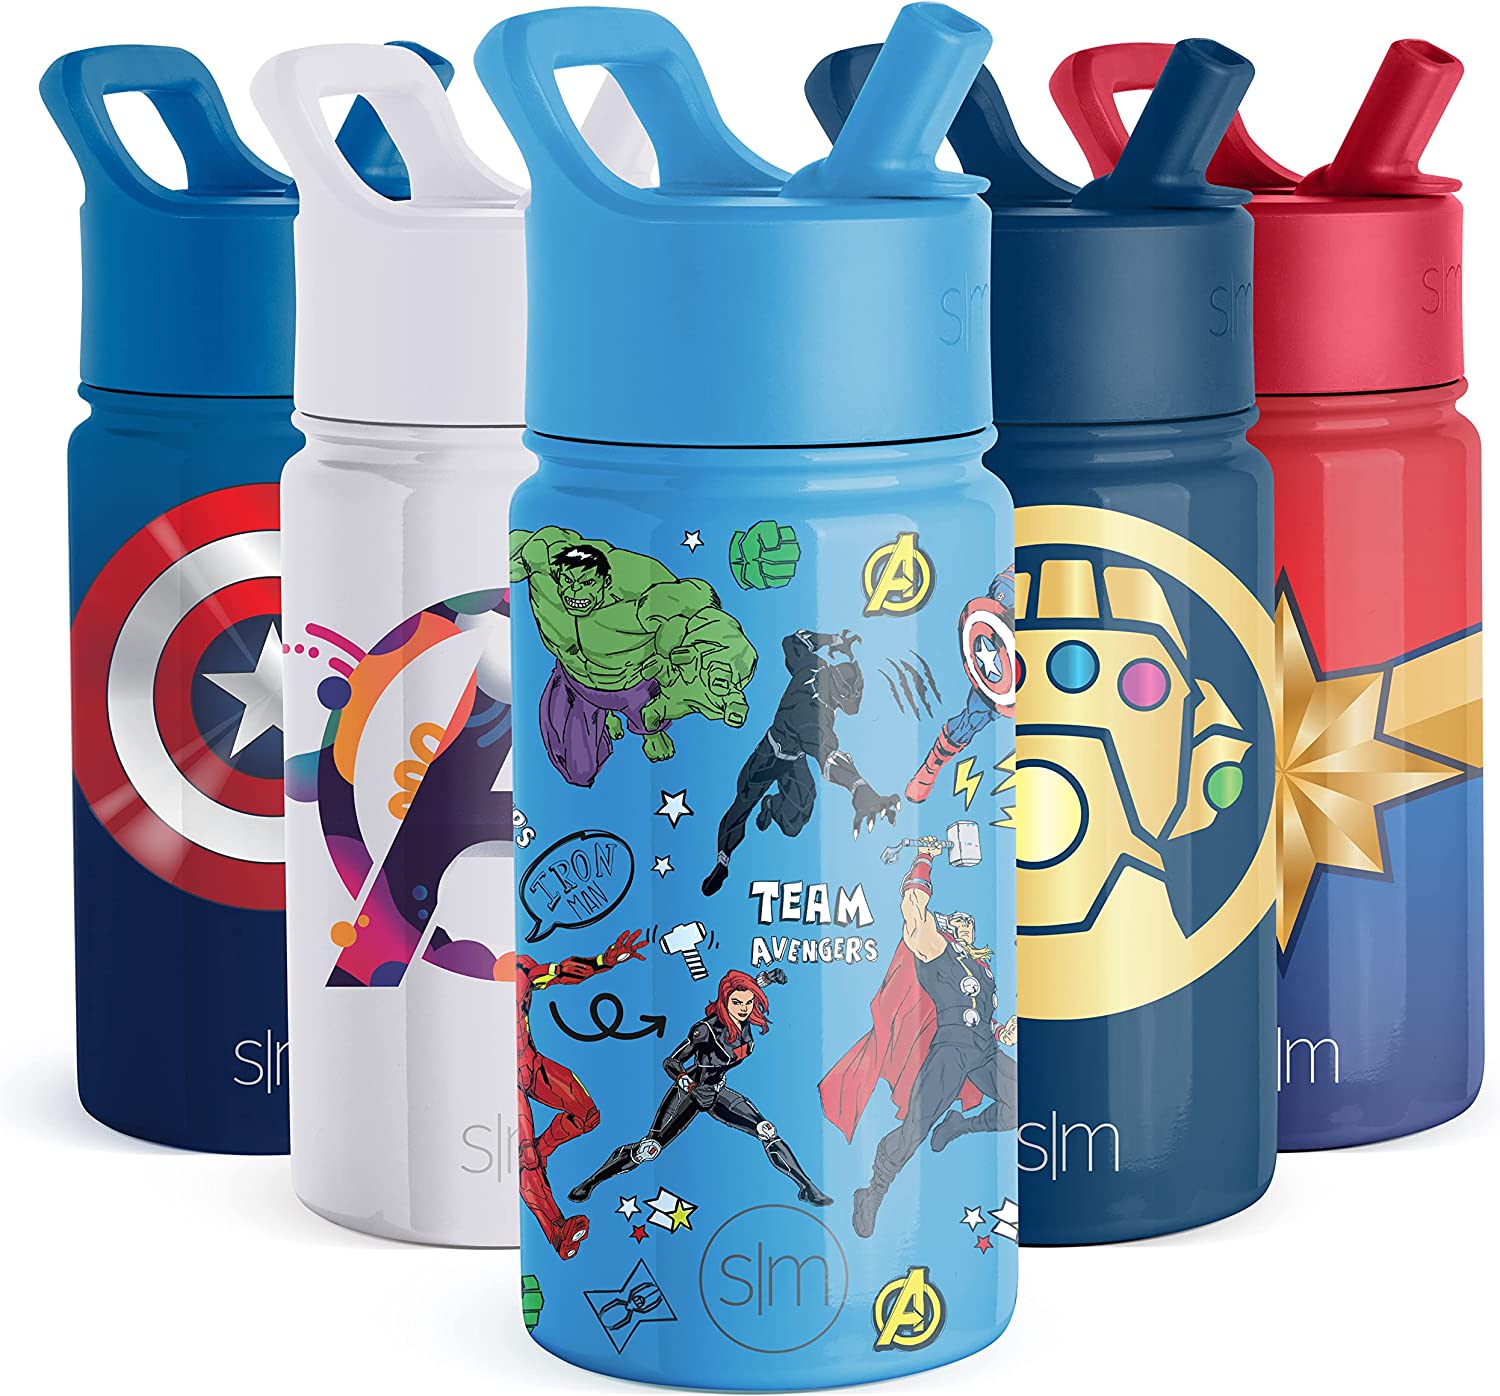 Kids Stainless Steel Cups With Silicone Lids & Sleeves, Kereda 5 Pack 8 oz.  Drinking Tumblers Eco-Friendly BPA-Free for